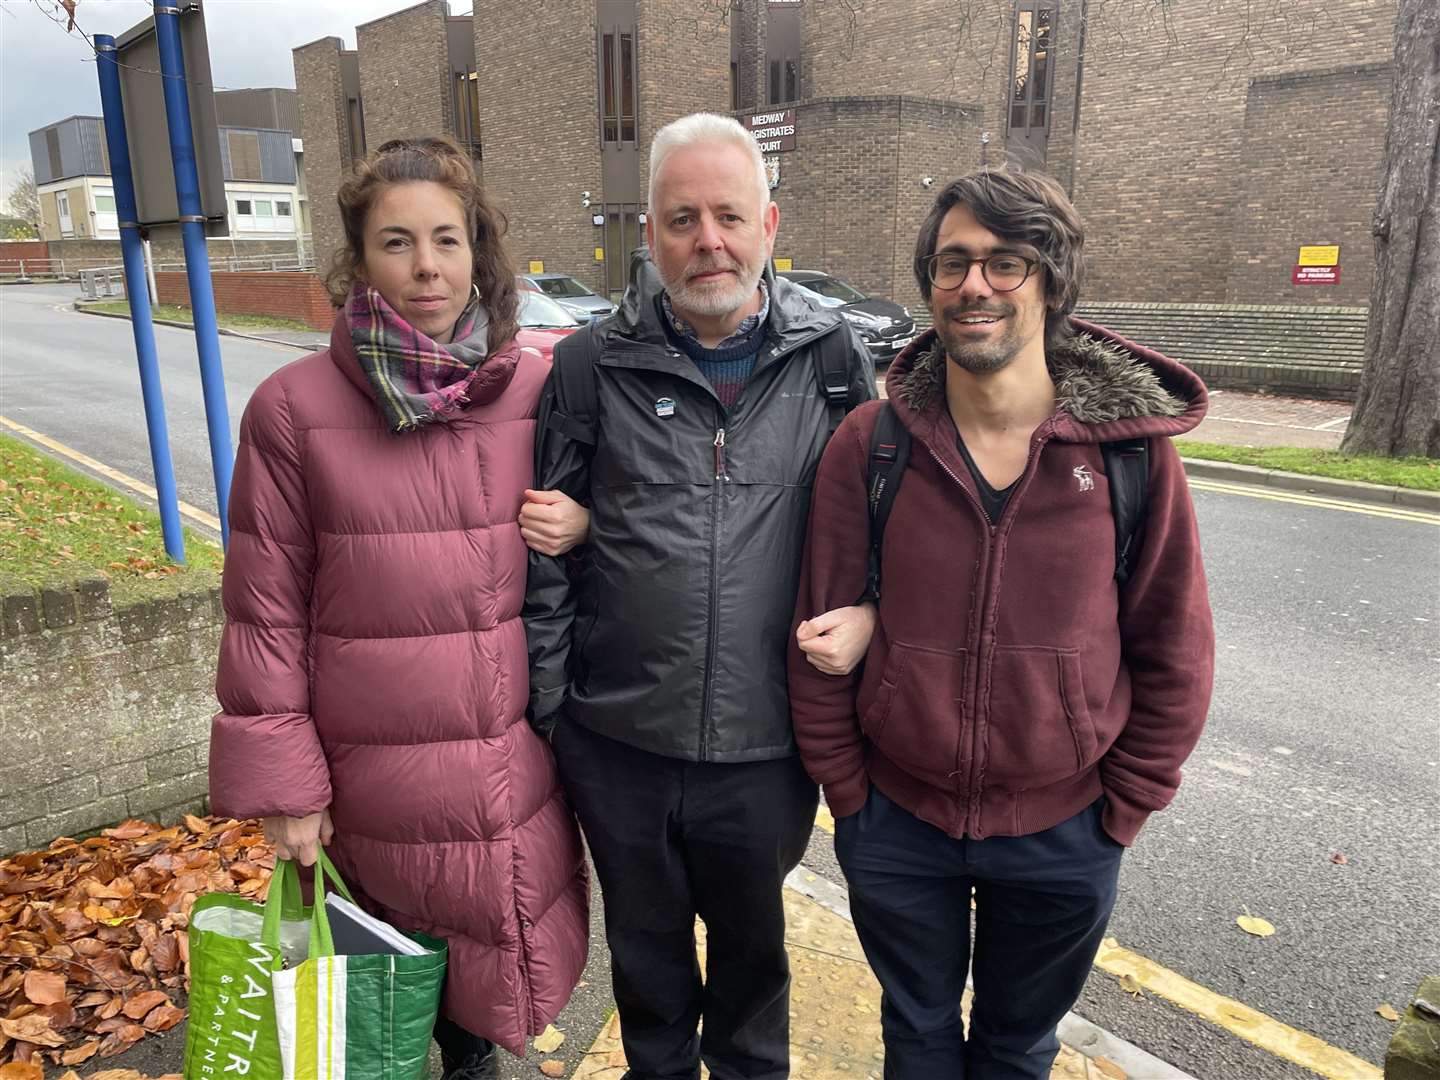 Amy Pritchard, Bernard Kelly and Alex Penson are members of Extinction Rebellion and are pictured outside Medway Magistrates' Court